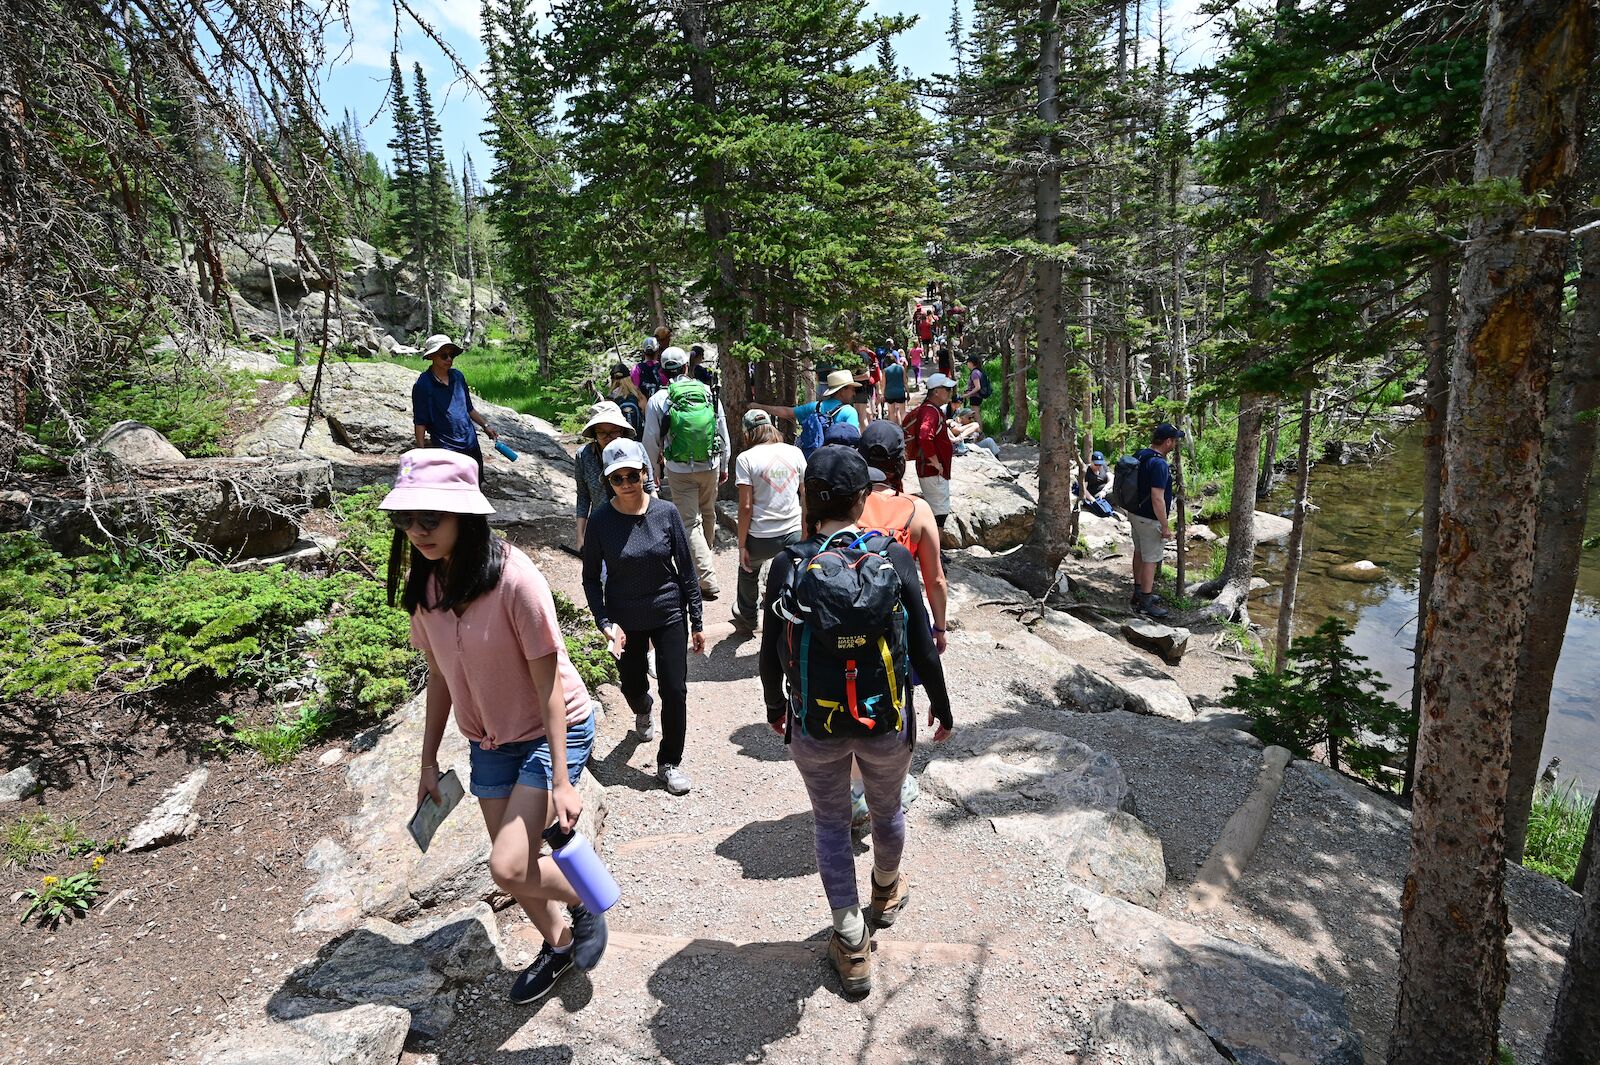 Expect crowded trails in RMNP in the summer - overtourism is evident on many top trails